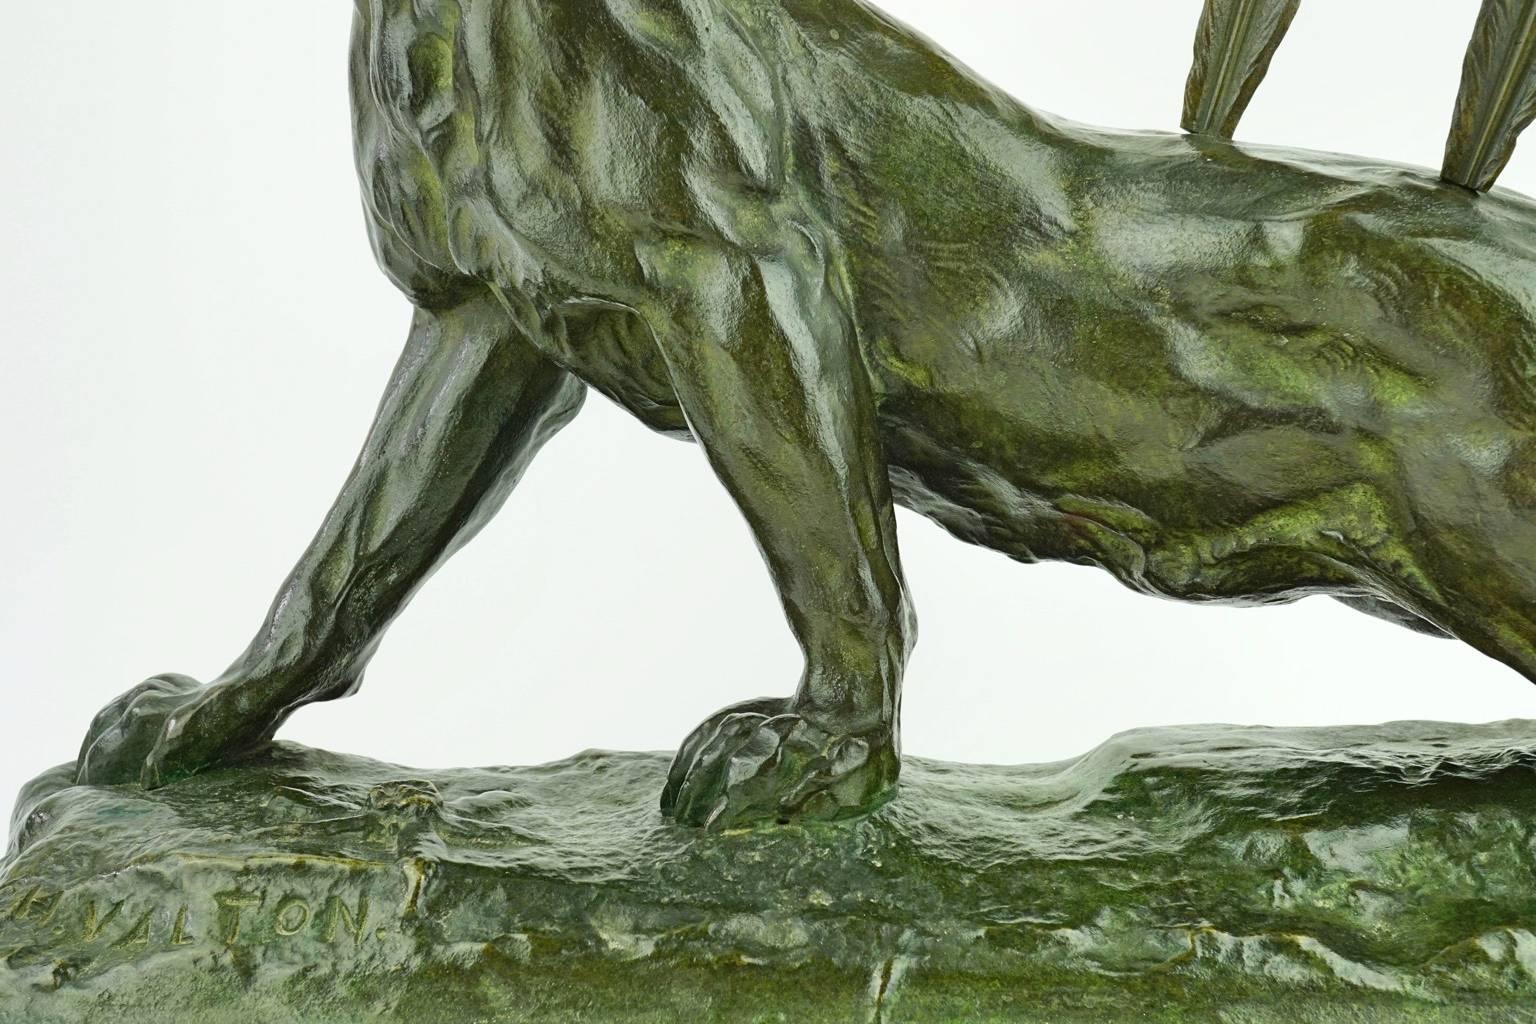 Like the Assyrian reliefs of wounded lions of the British Museum, this wounded lioness with two arrows in its back is full of drama.

The famous French sculptor Charles Valton (1851-1918) specialized in big cats taken from life at the Jardin des